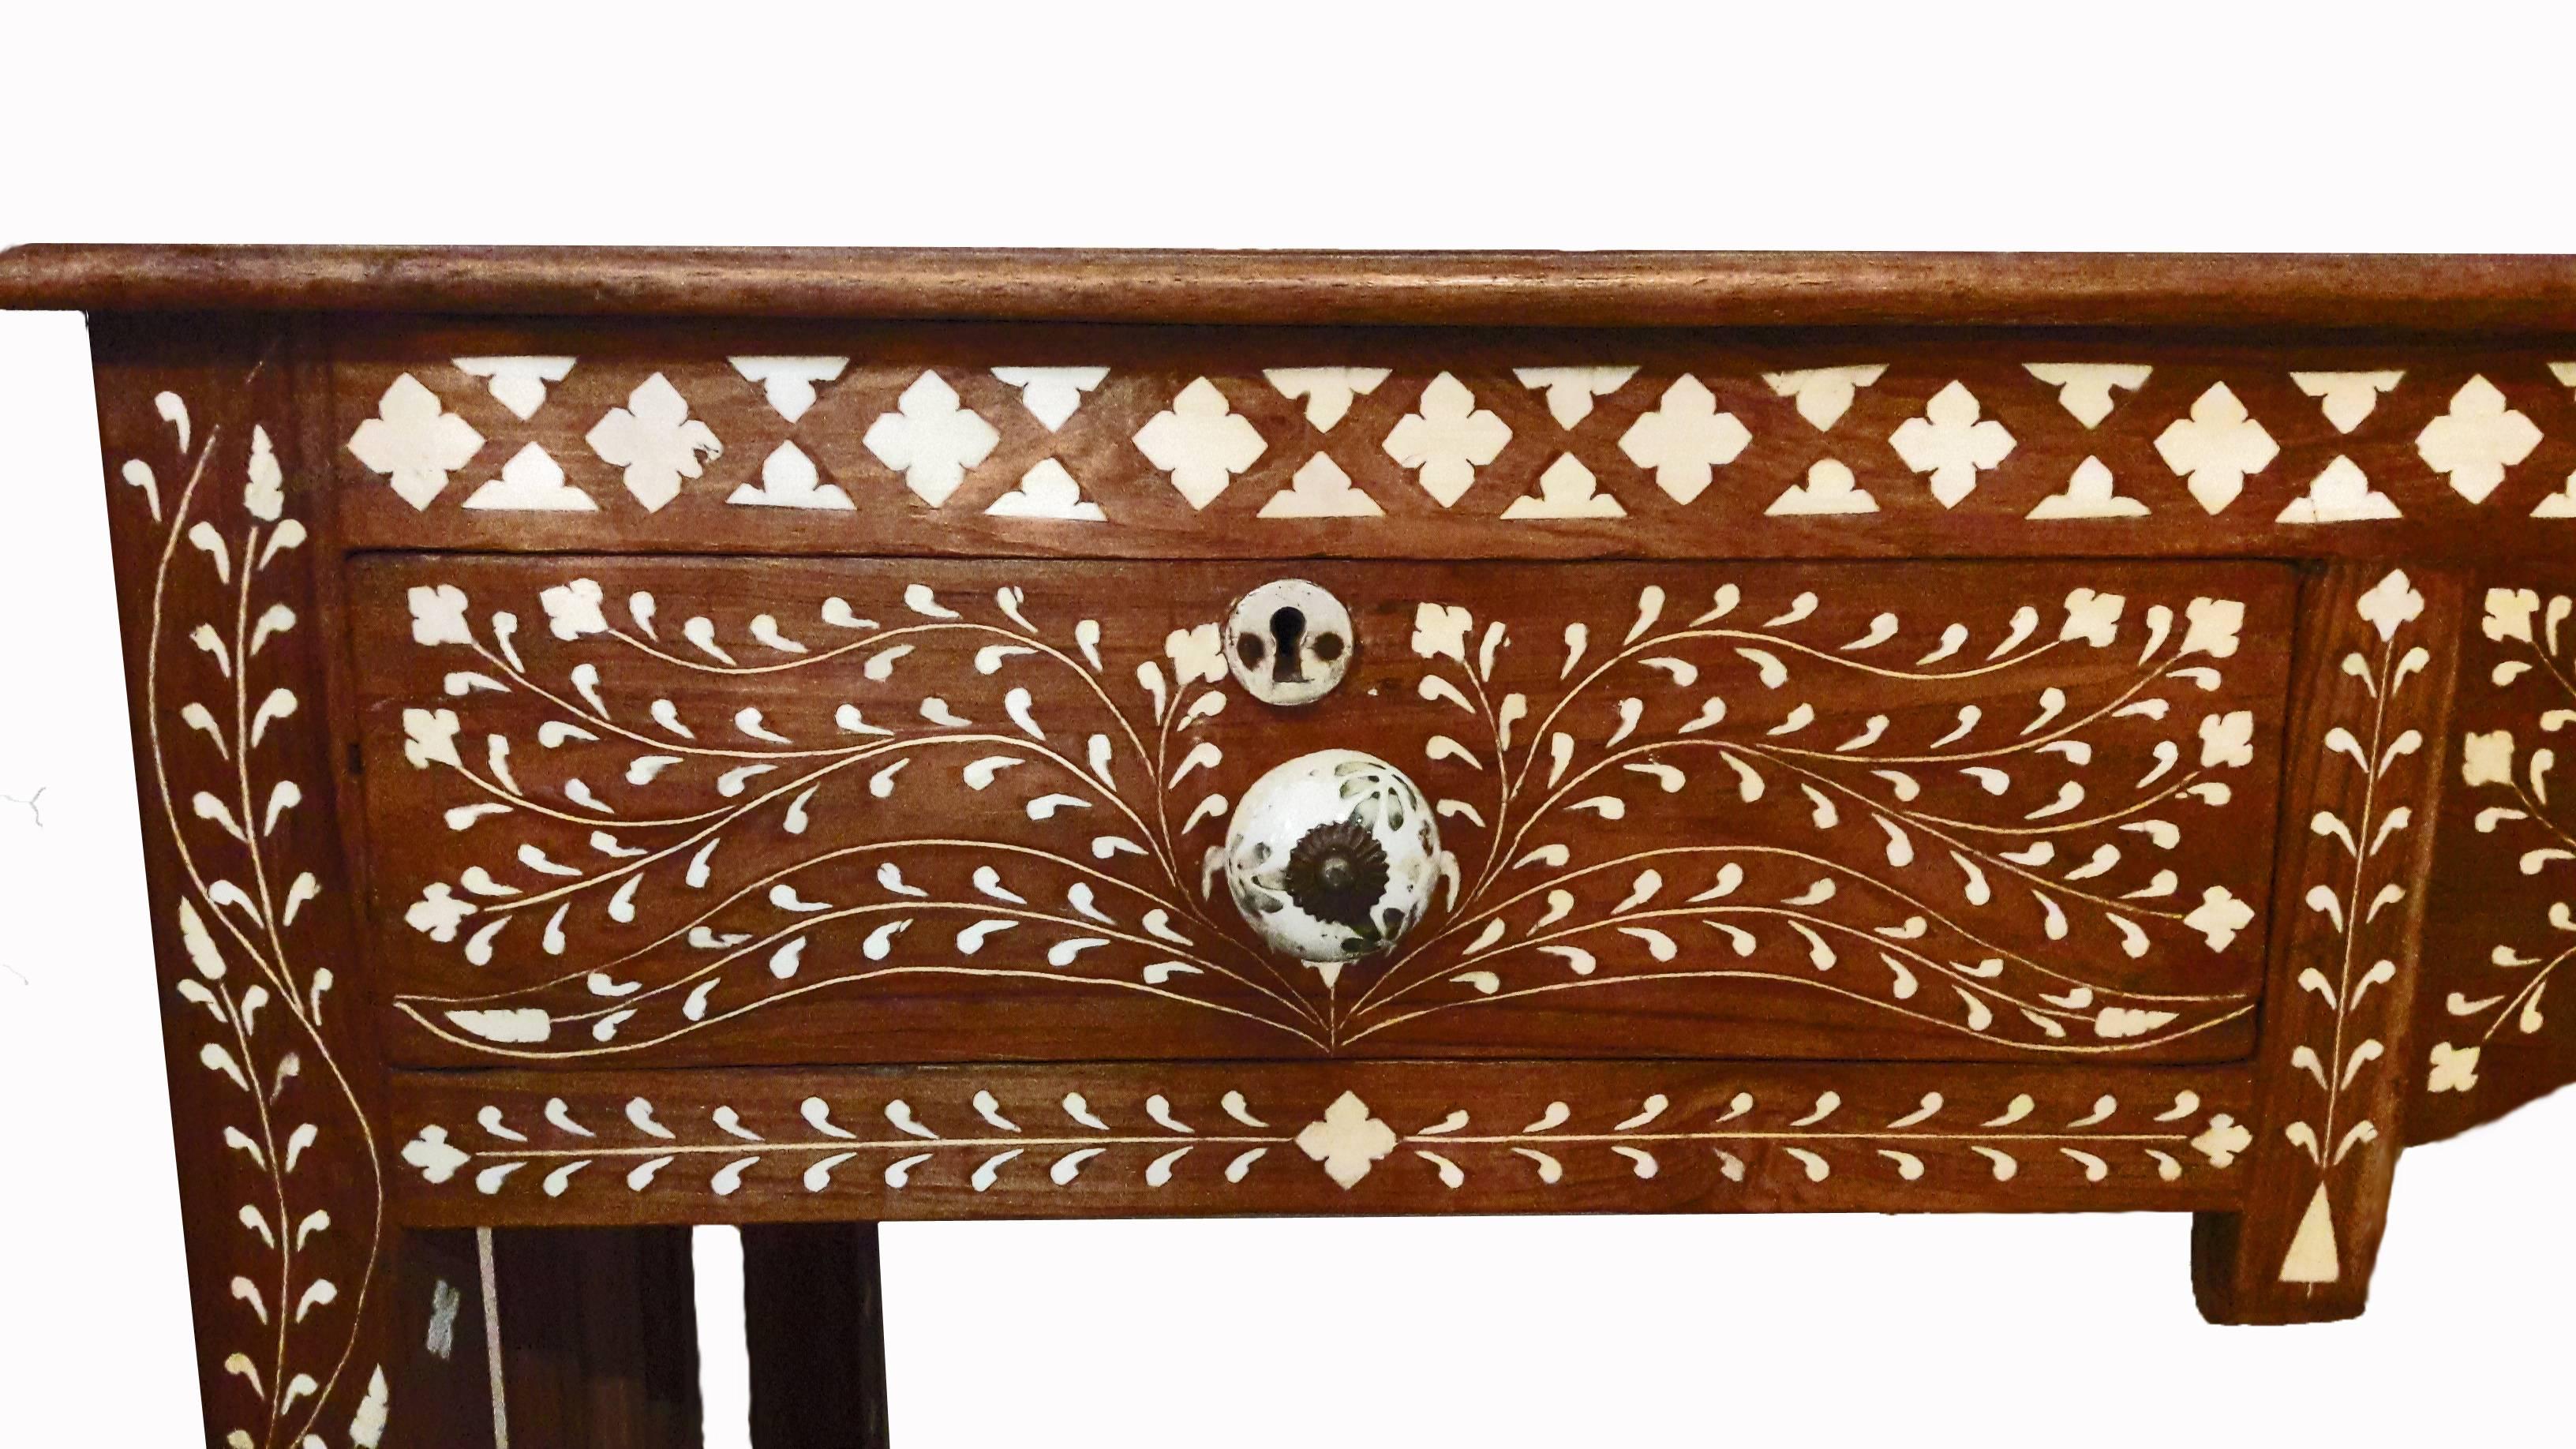 Anglo-Indian Bone-Inlaid Teak Desk from India, 20th Century